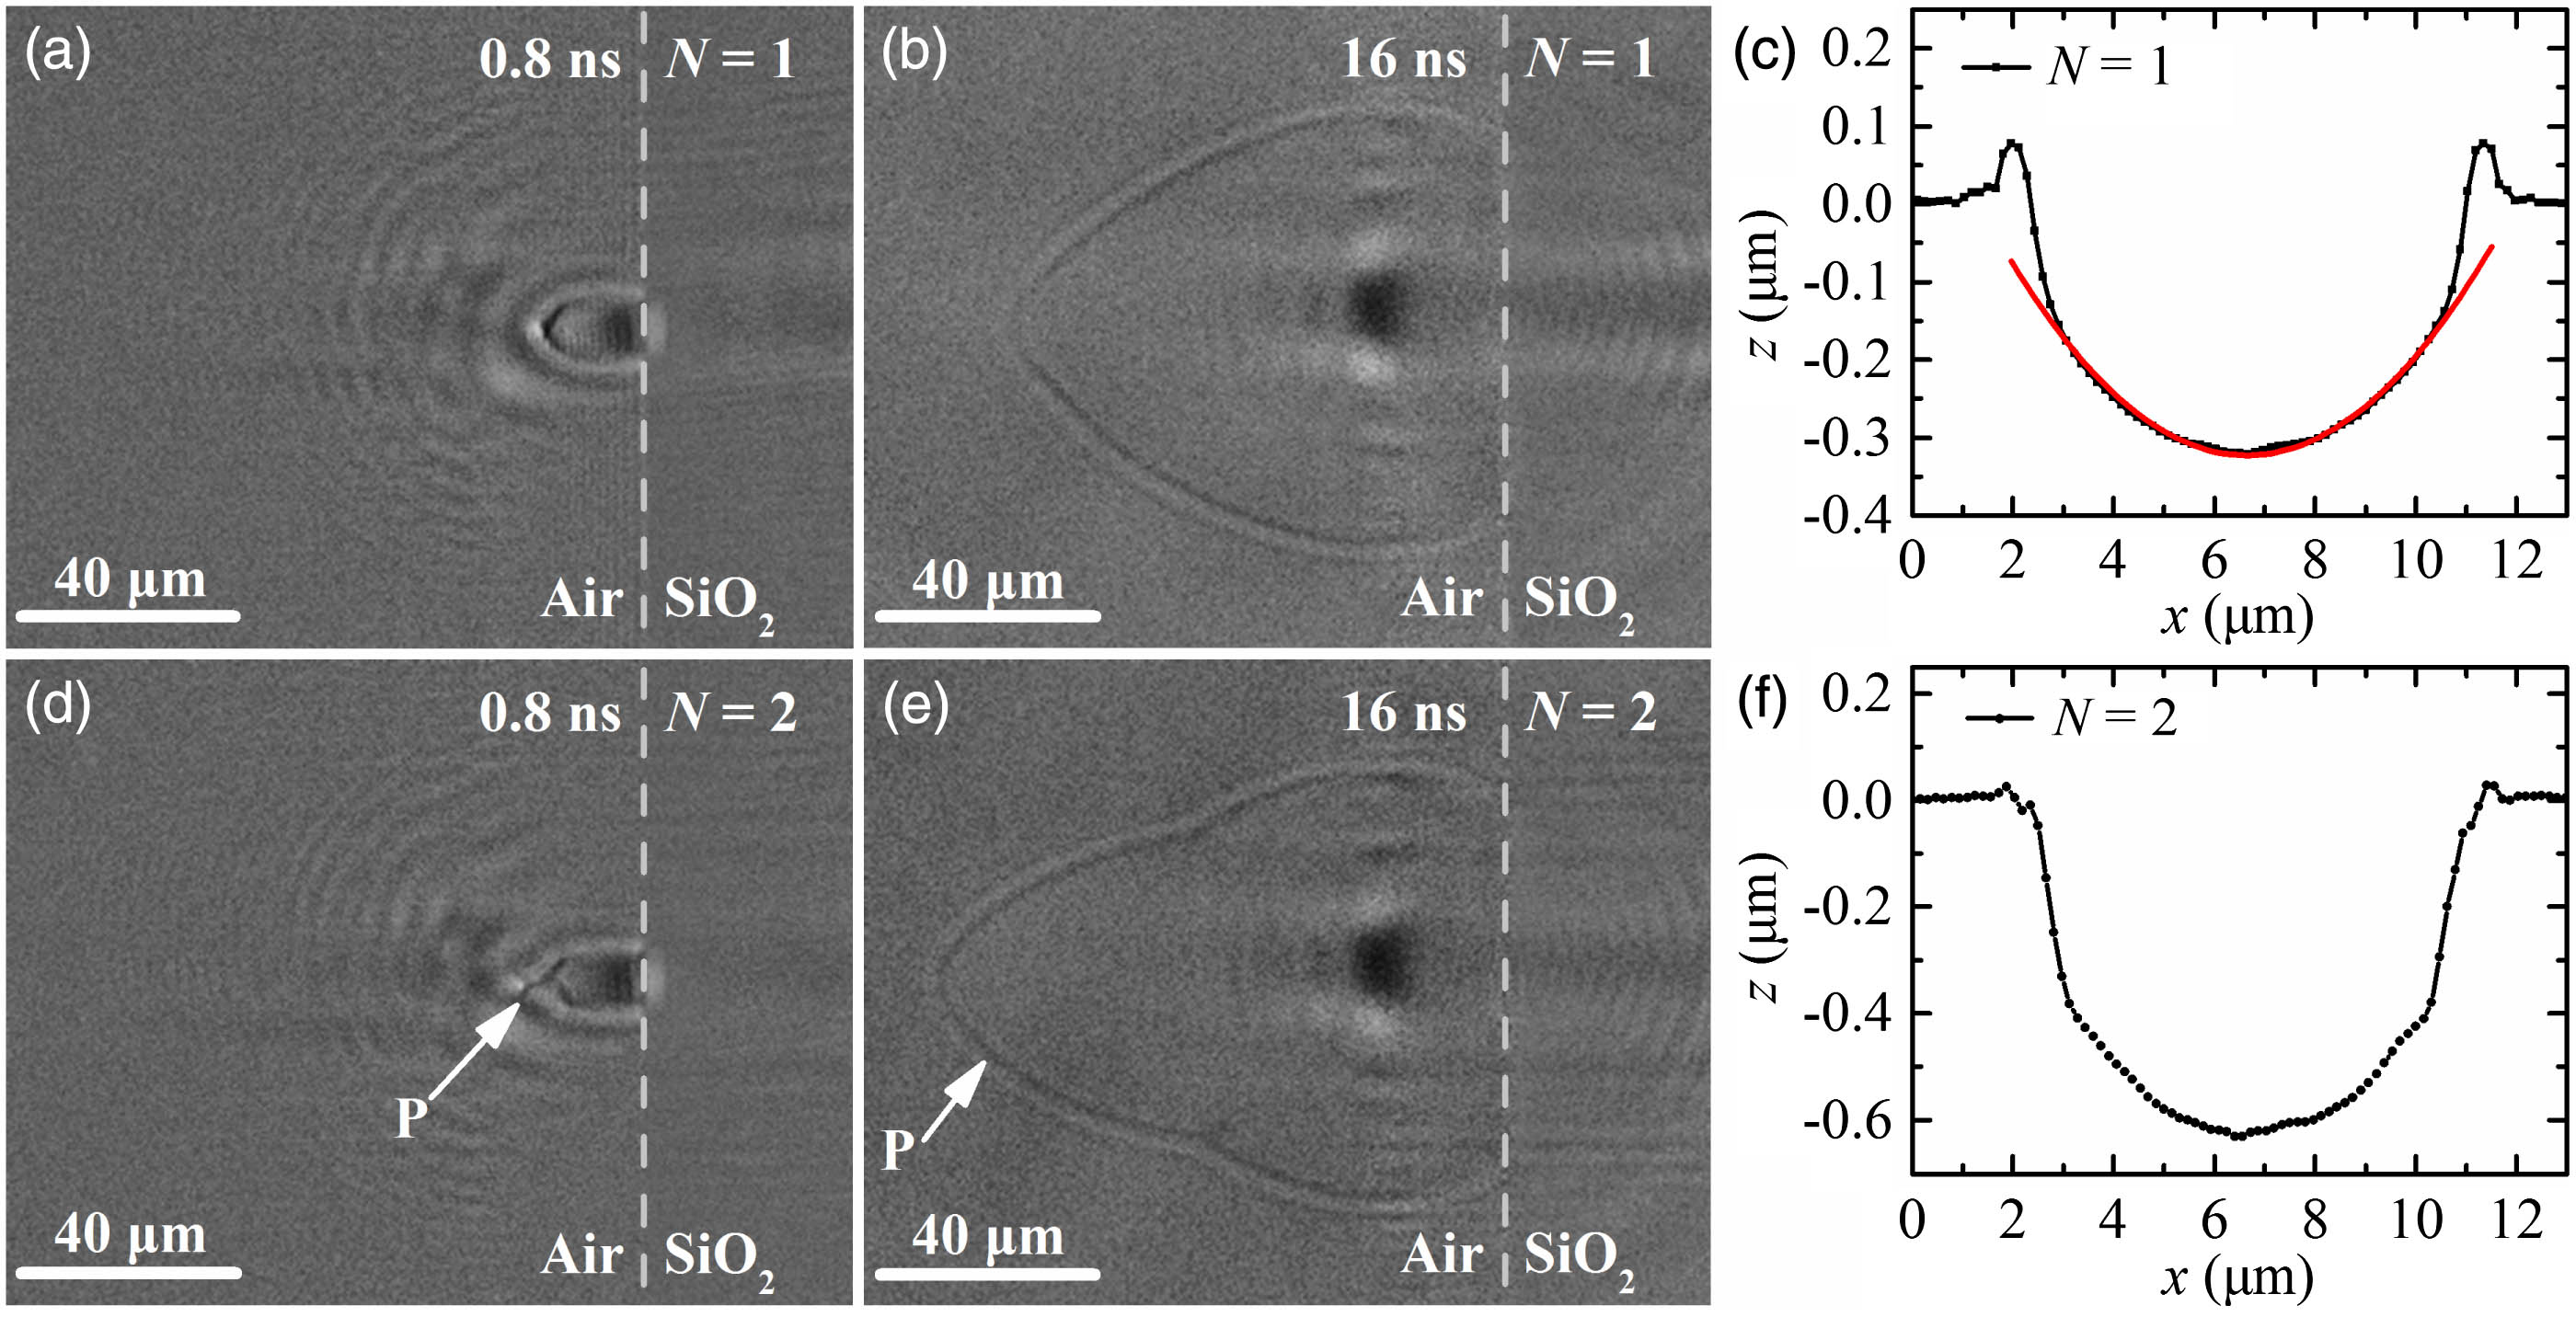 Time-resolved shadowgraphs of the plasma and shockwave generated by femtosecond laser irradiation on fused silica with a laser fluence of 13.75 J/cm2. (a), (b) Images recorded after the first pulse (N=1); (d), (e) images recorded after the second pulse (N=2). P indicates the protuberance on the top of the plasma and shockwave front. (c), (f) AFM morphologies of the crater cross section after the first and second pulse ablation. The red line in (c) is the parabolic curve fitting for the cross section with a radius of curvature of 44 μm.